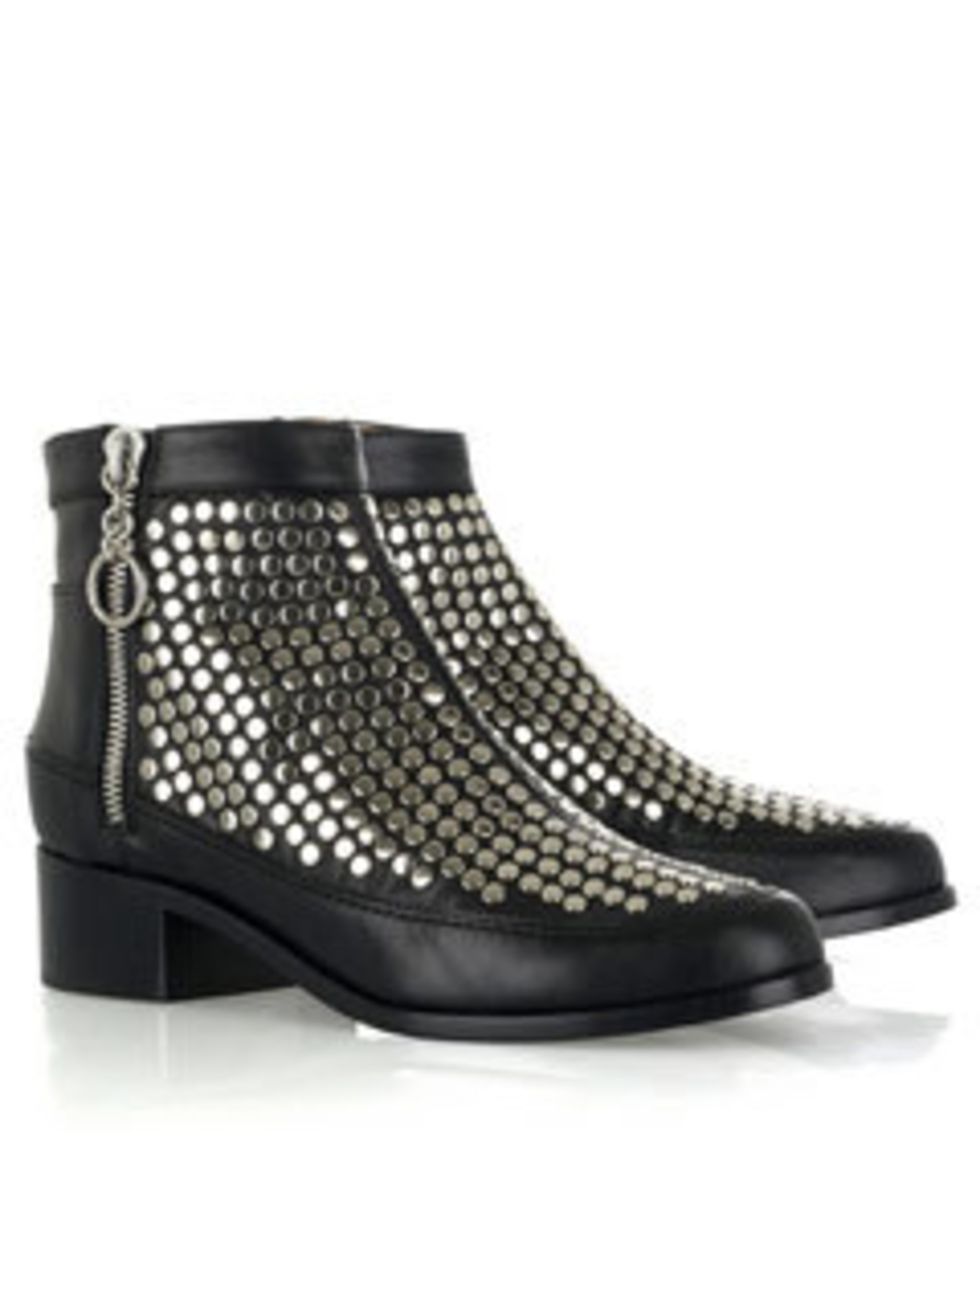 <p>Silver studded leather boots, £700, by Proenza Schouler at <a href="http://www.net-a-porter.com/product/48393">Net-a-Porter</a></p>